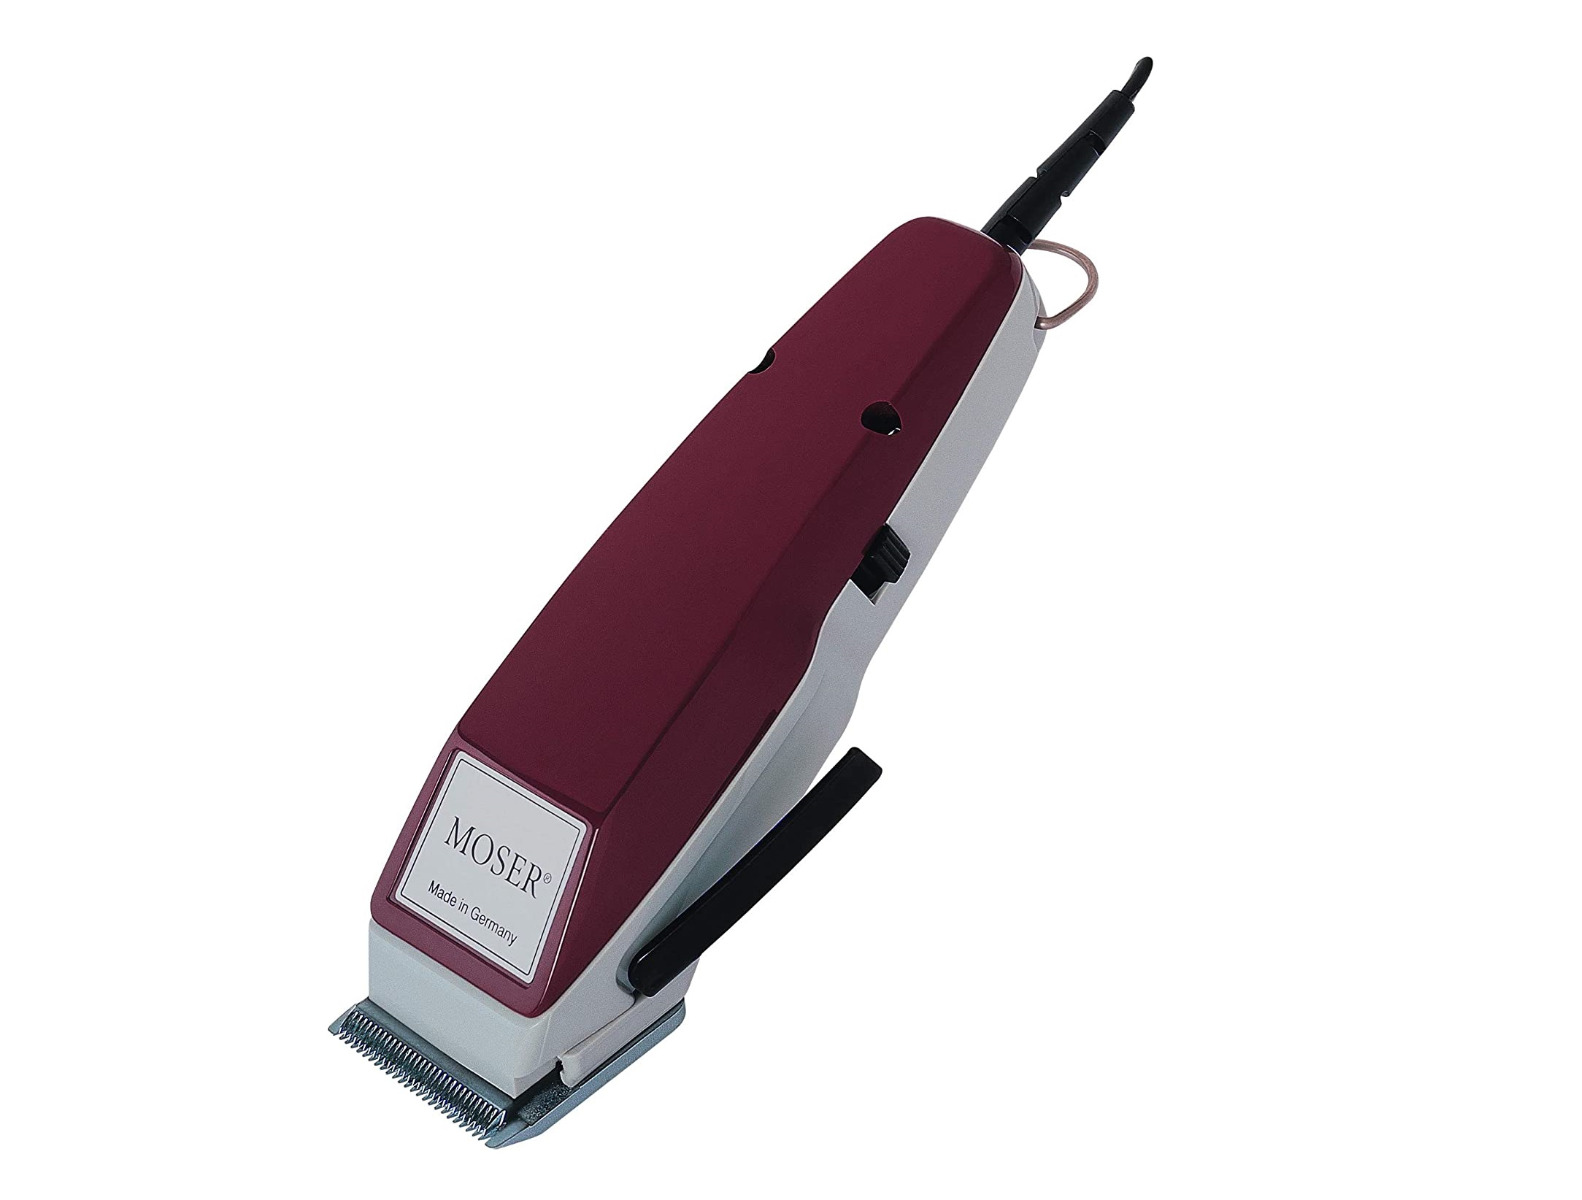 Moser Professional Corded Hair Clipper, Burgandy - 1400-0150